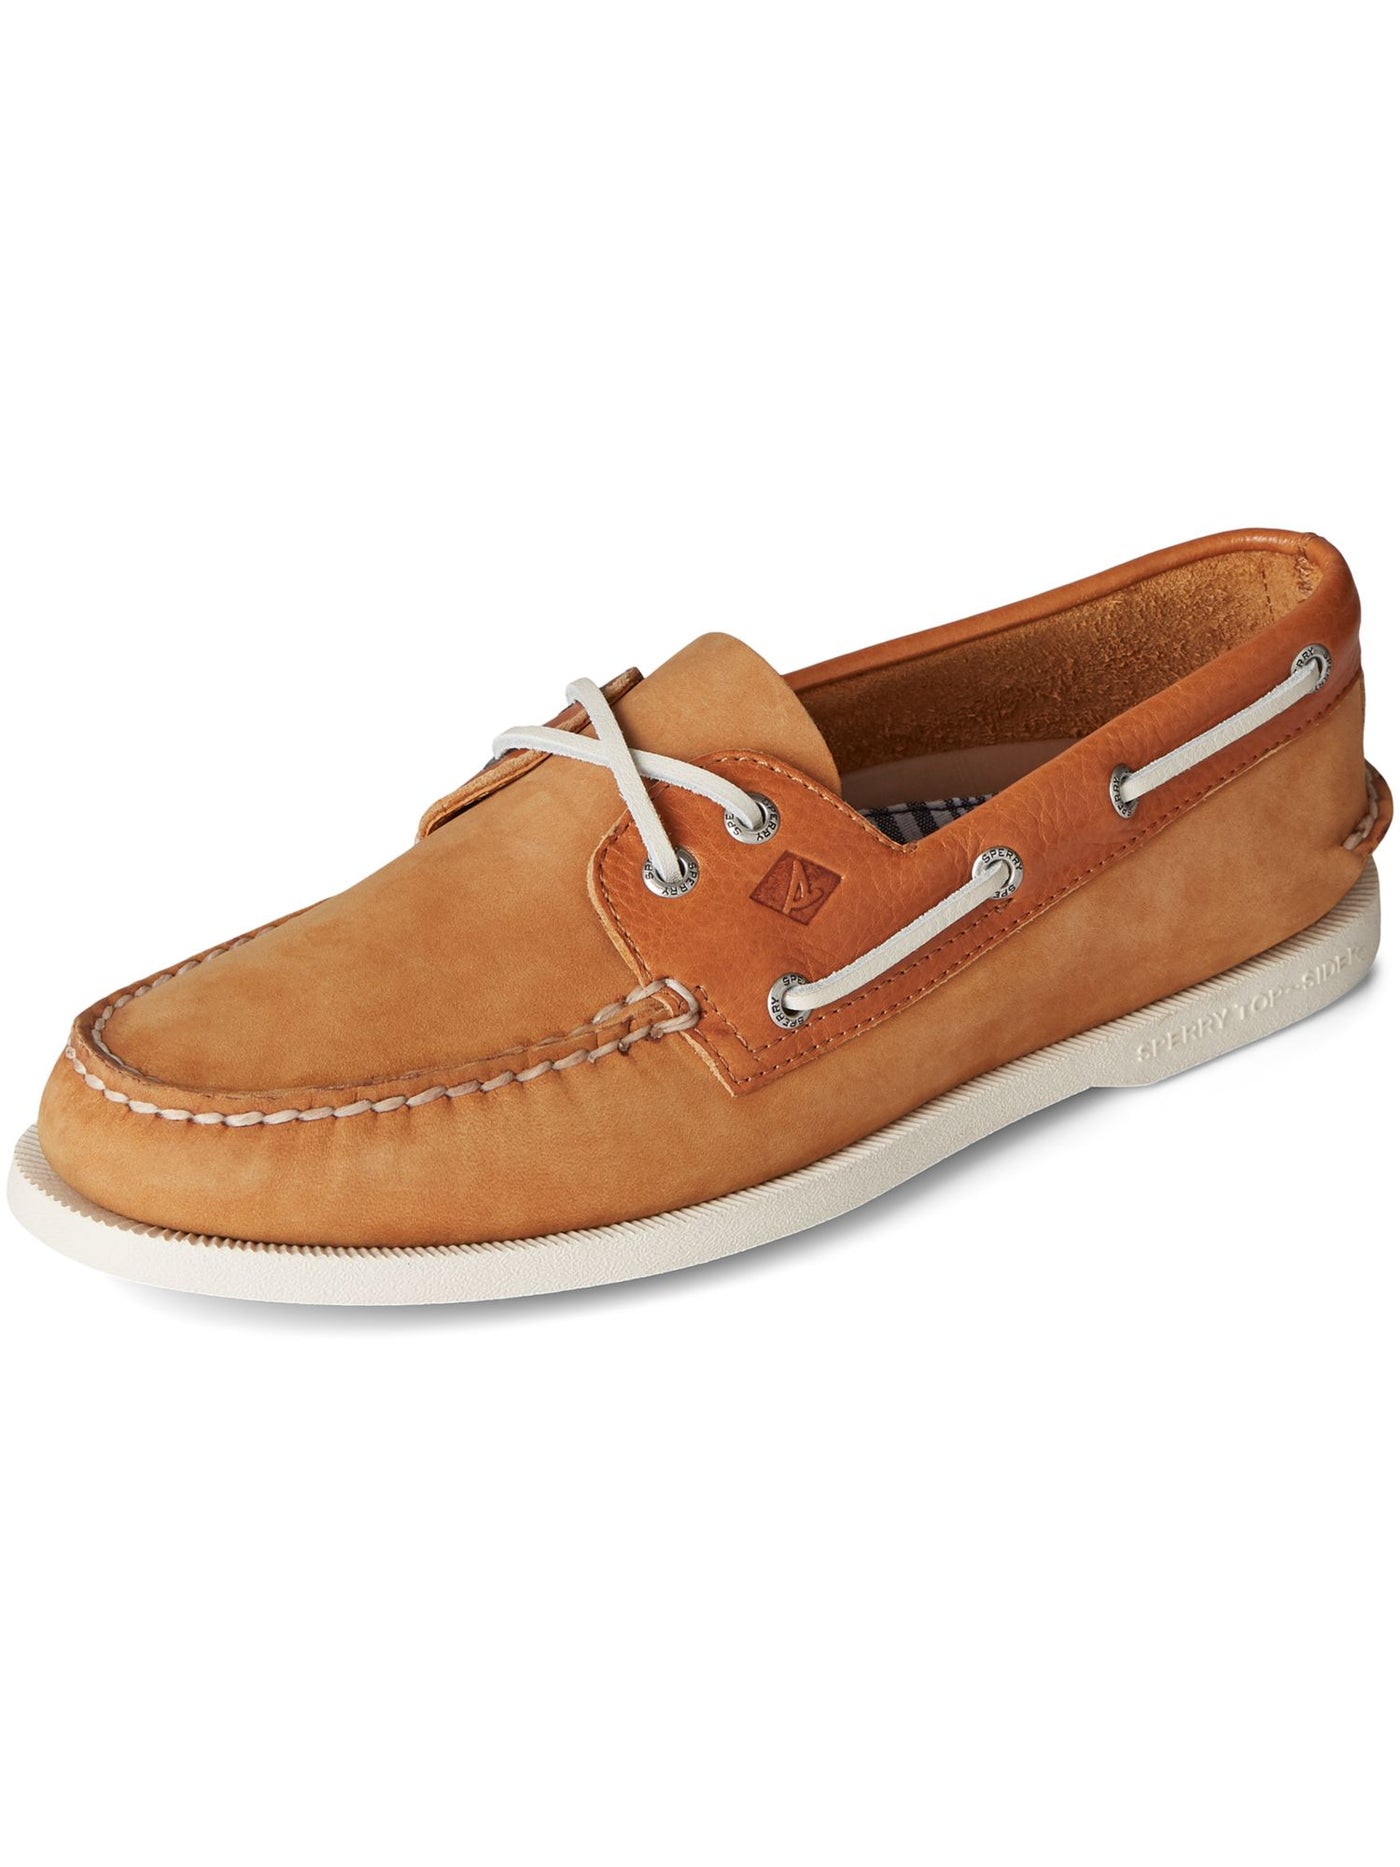 SPERRY Mens Beige Non-Marking Padded A/o 2-eye Round Toe Lace-Up Leather Boat Shoes 8.5 M